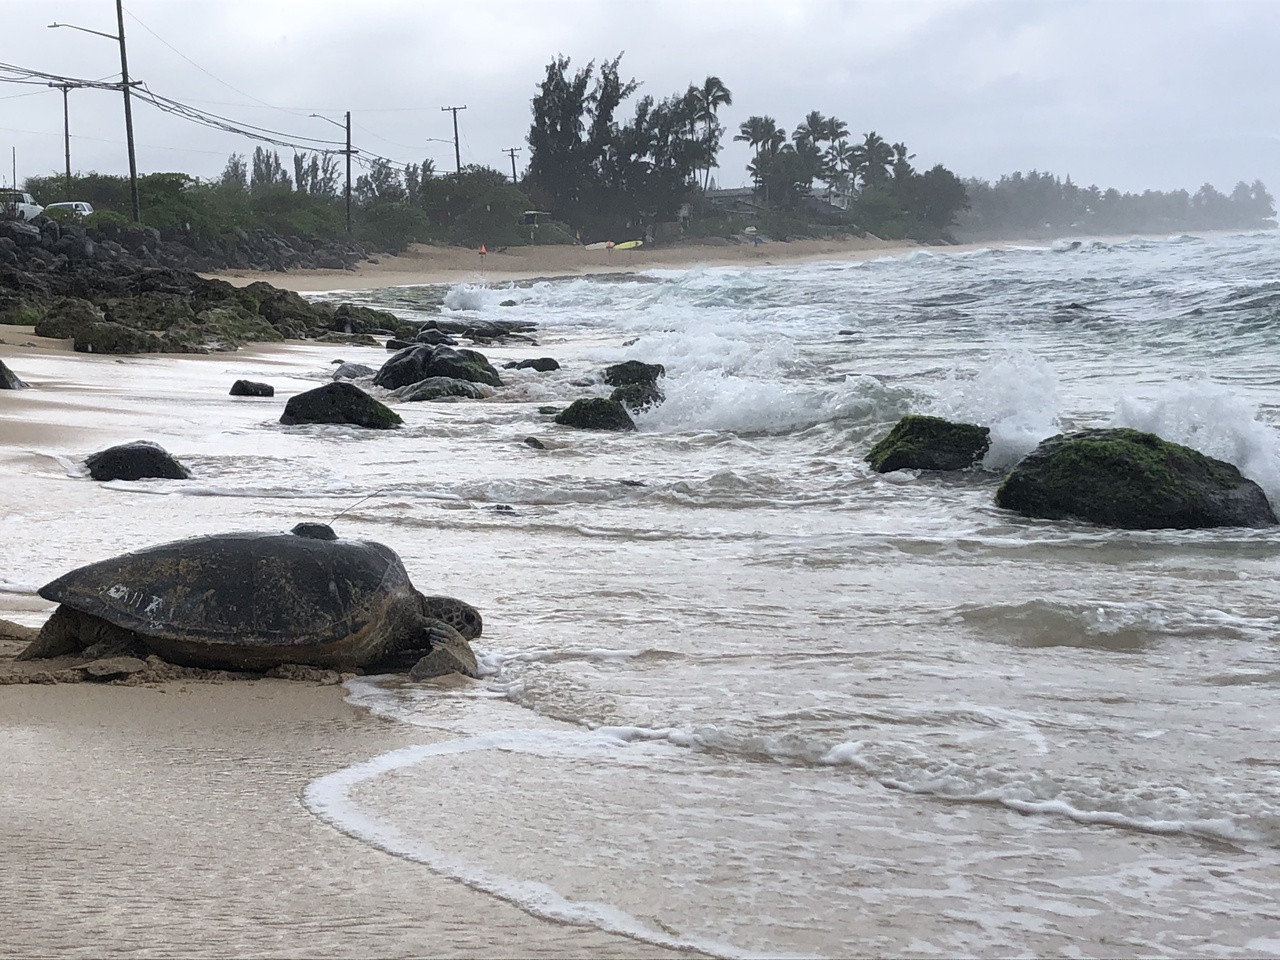 Image: Punahele: A Green Sea Turtle's Journey to "Destination Unknown"